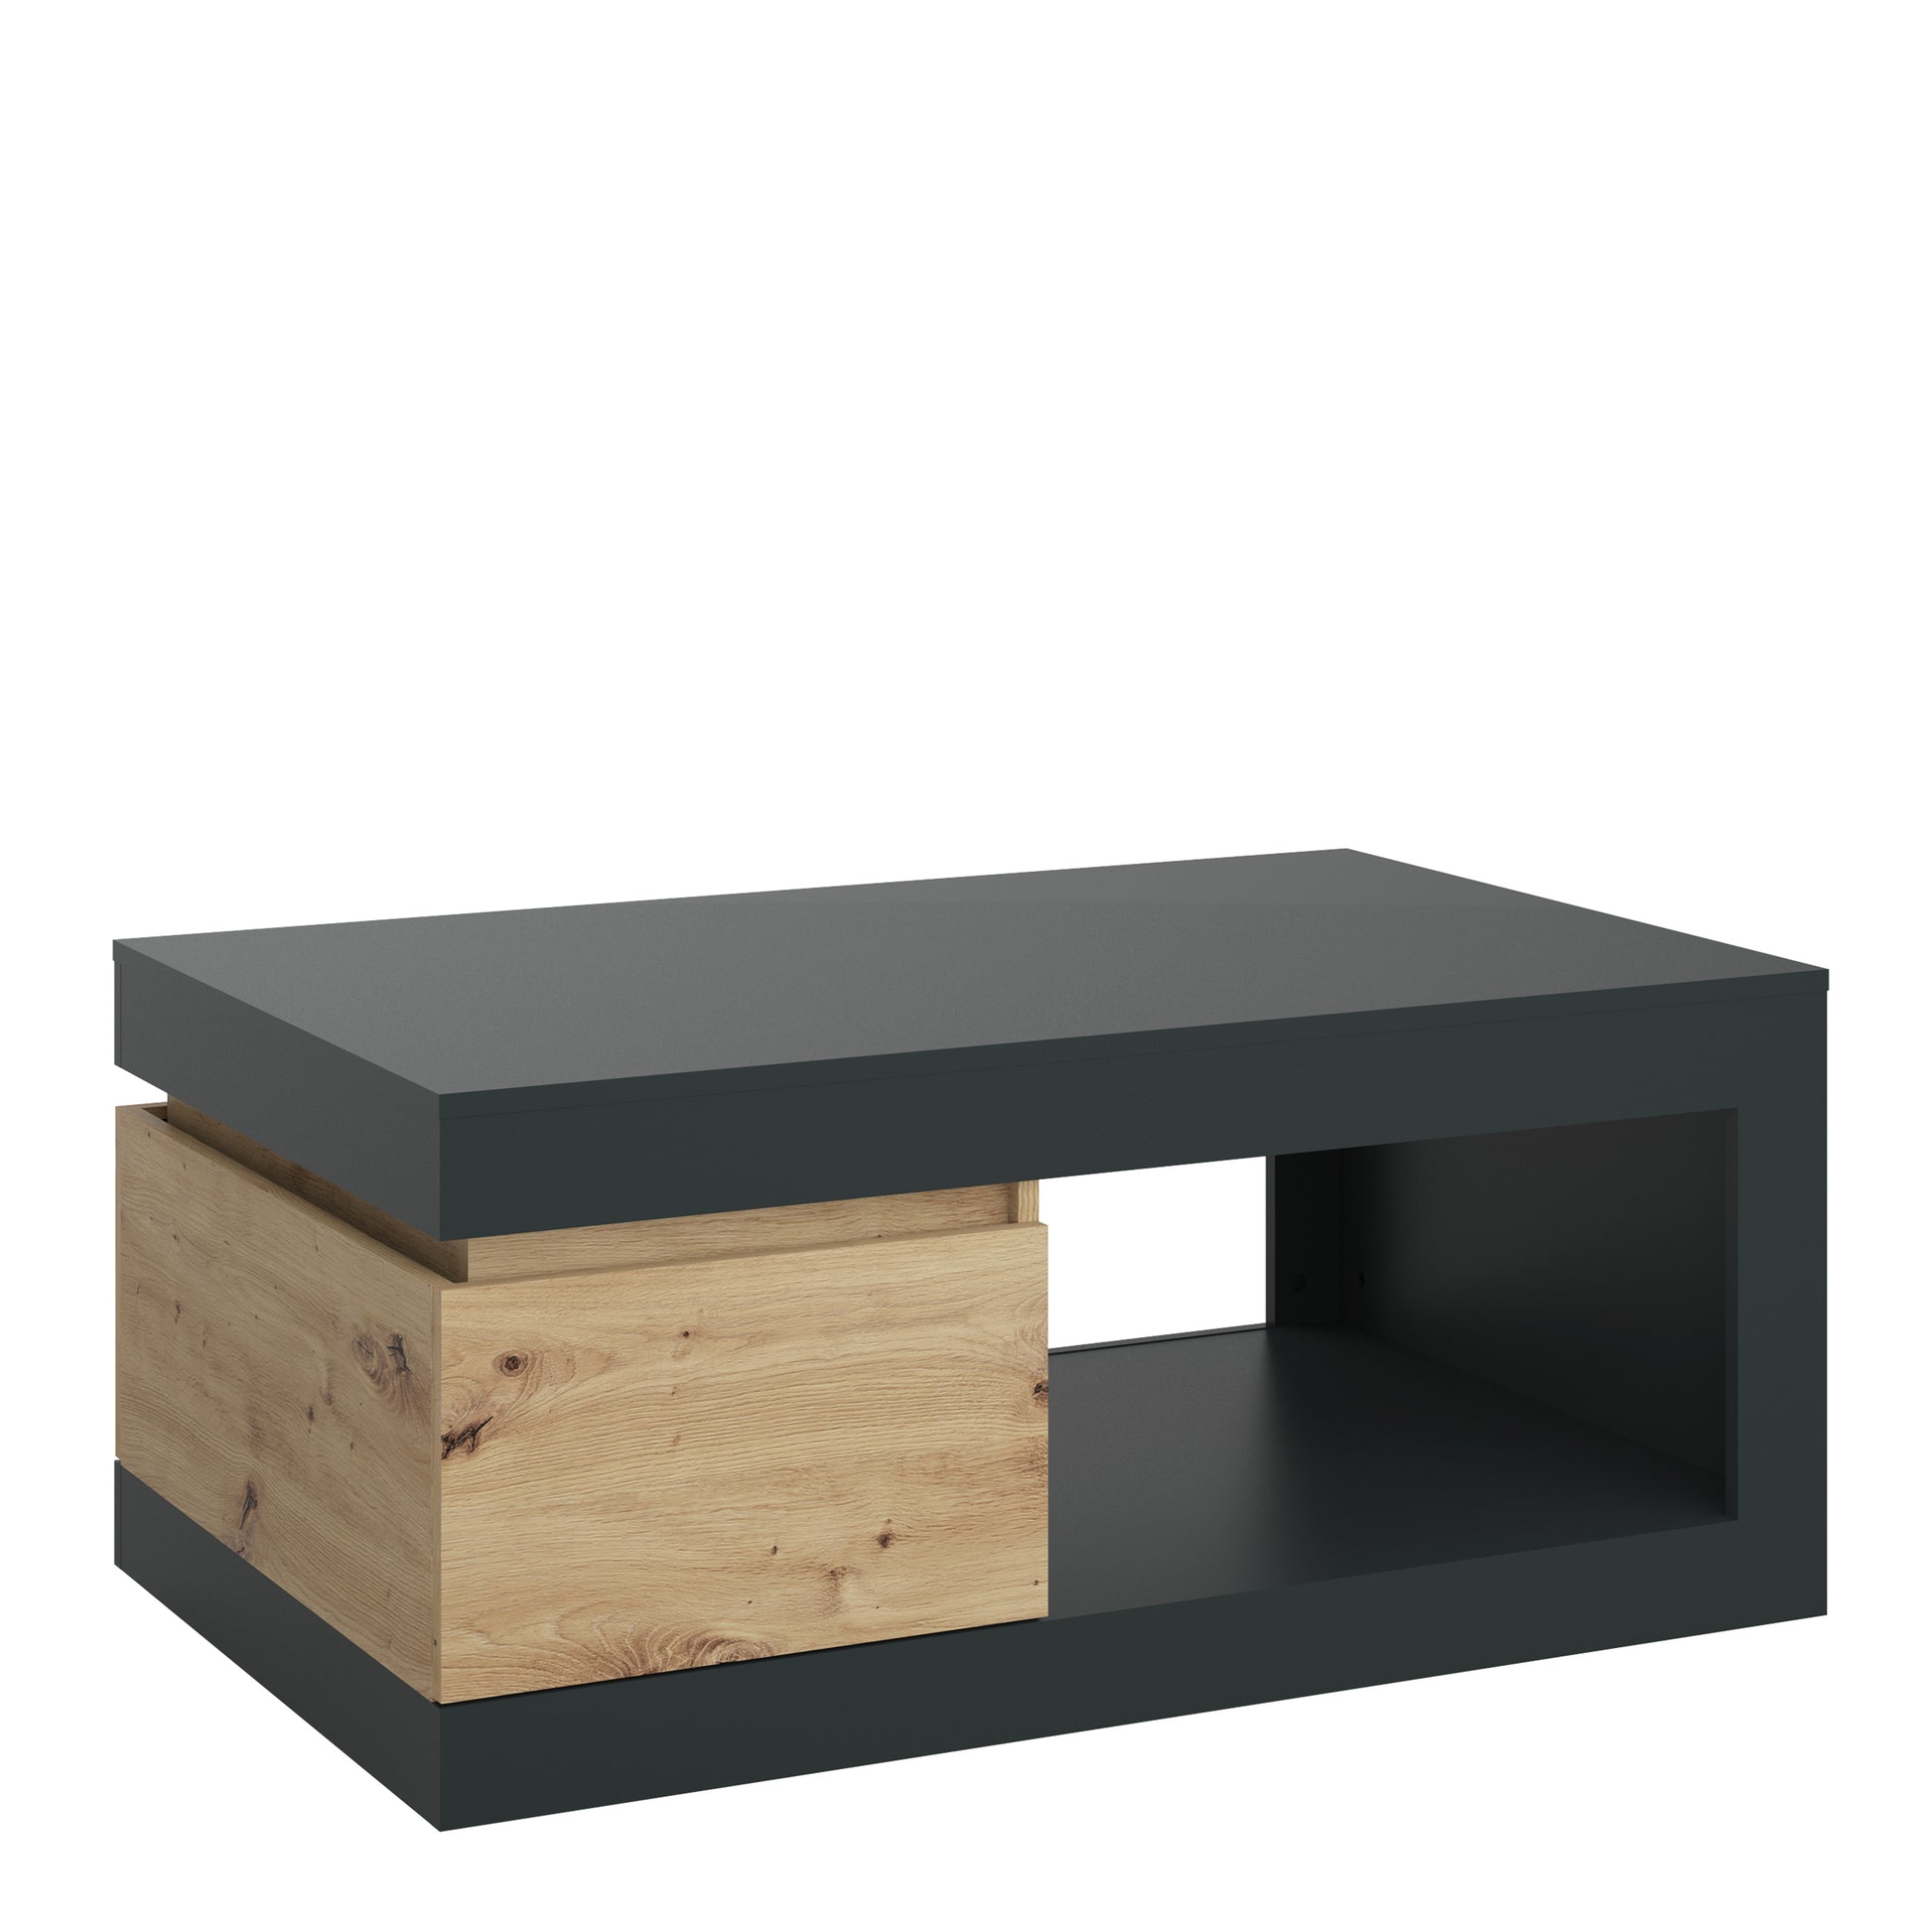 Luci Dark Luci 1 drawer coffee table in Platinum and Oak